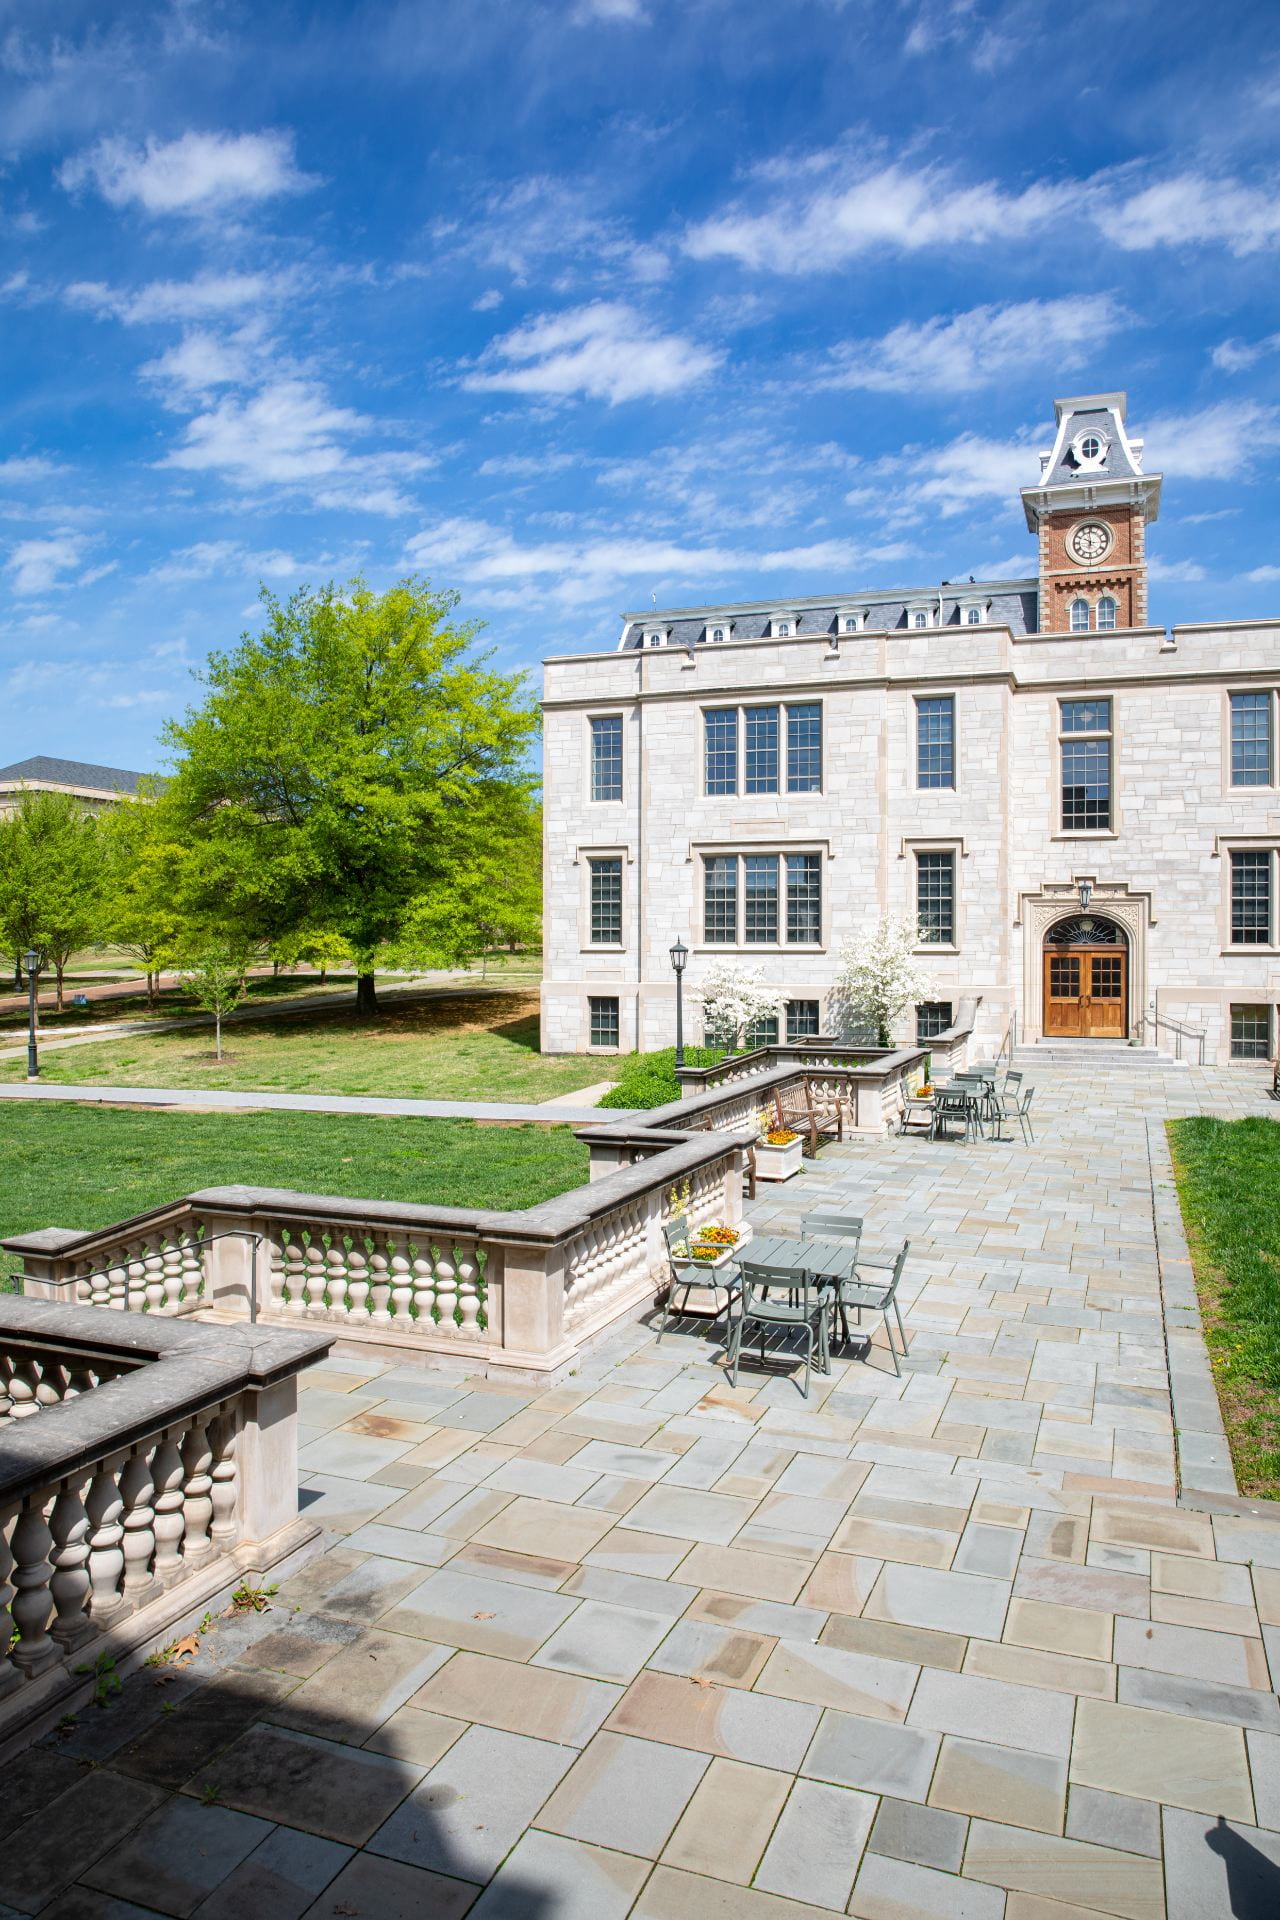 A north-facing view of the Gearhart Hall courtyard on campus, with clear blue skies and Old Main in the background.